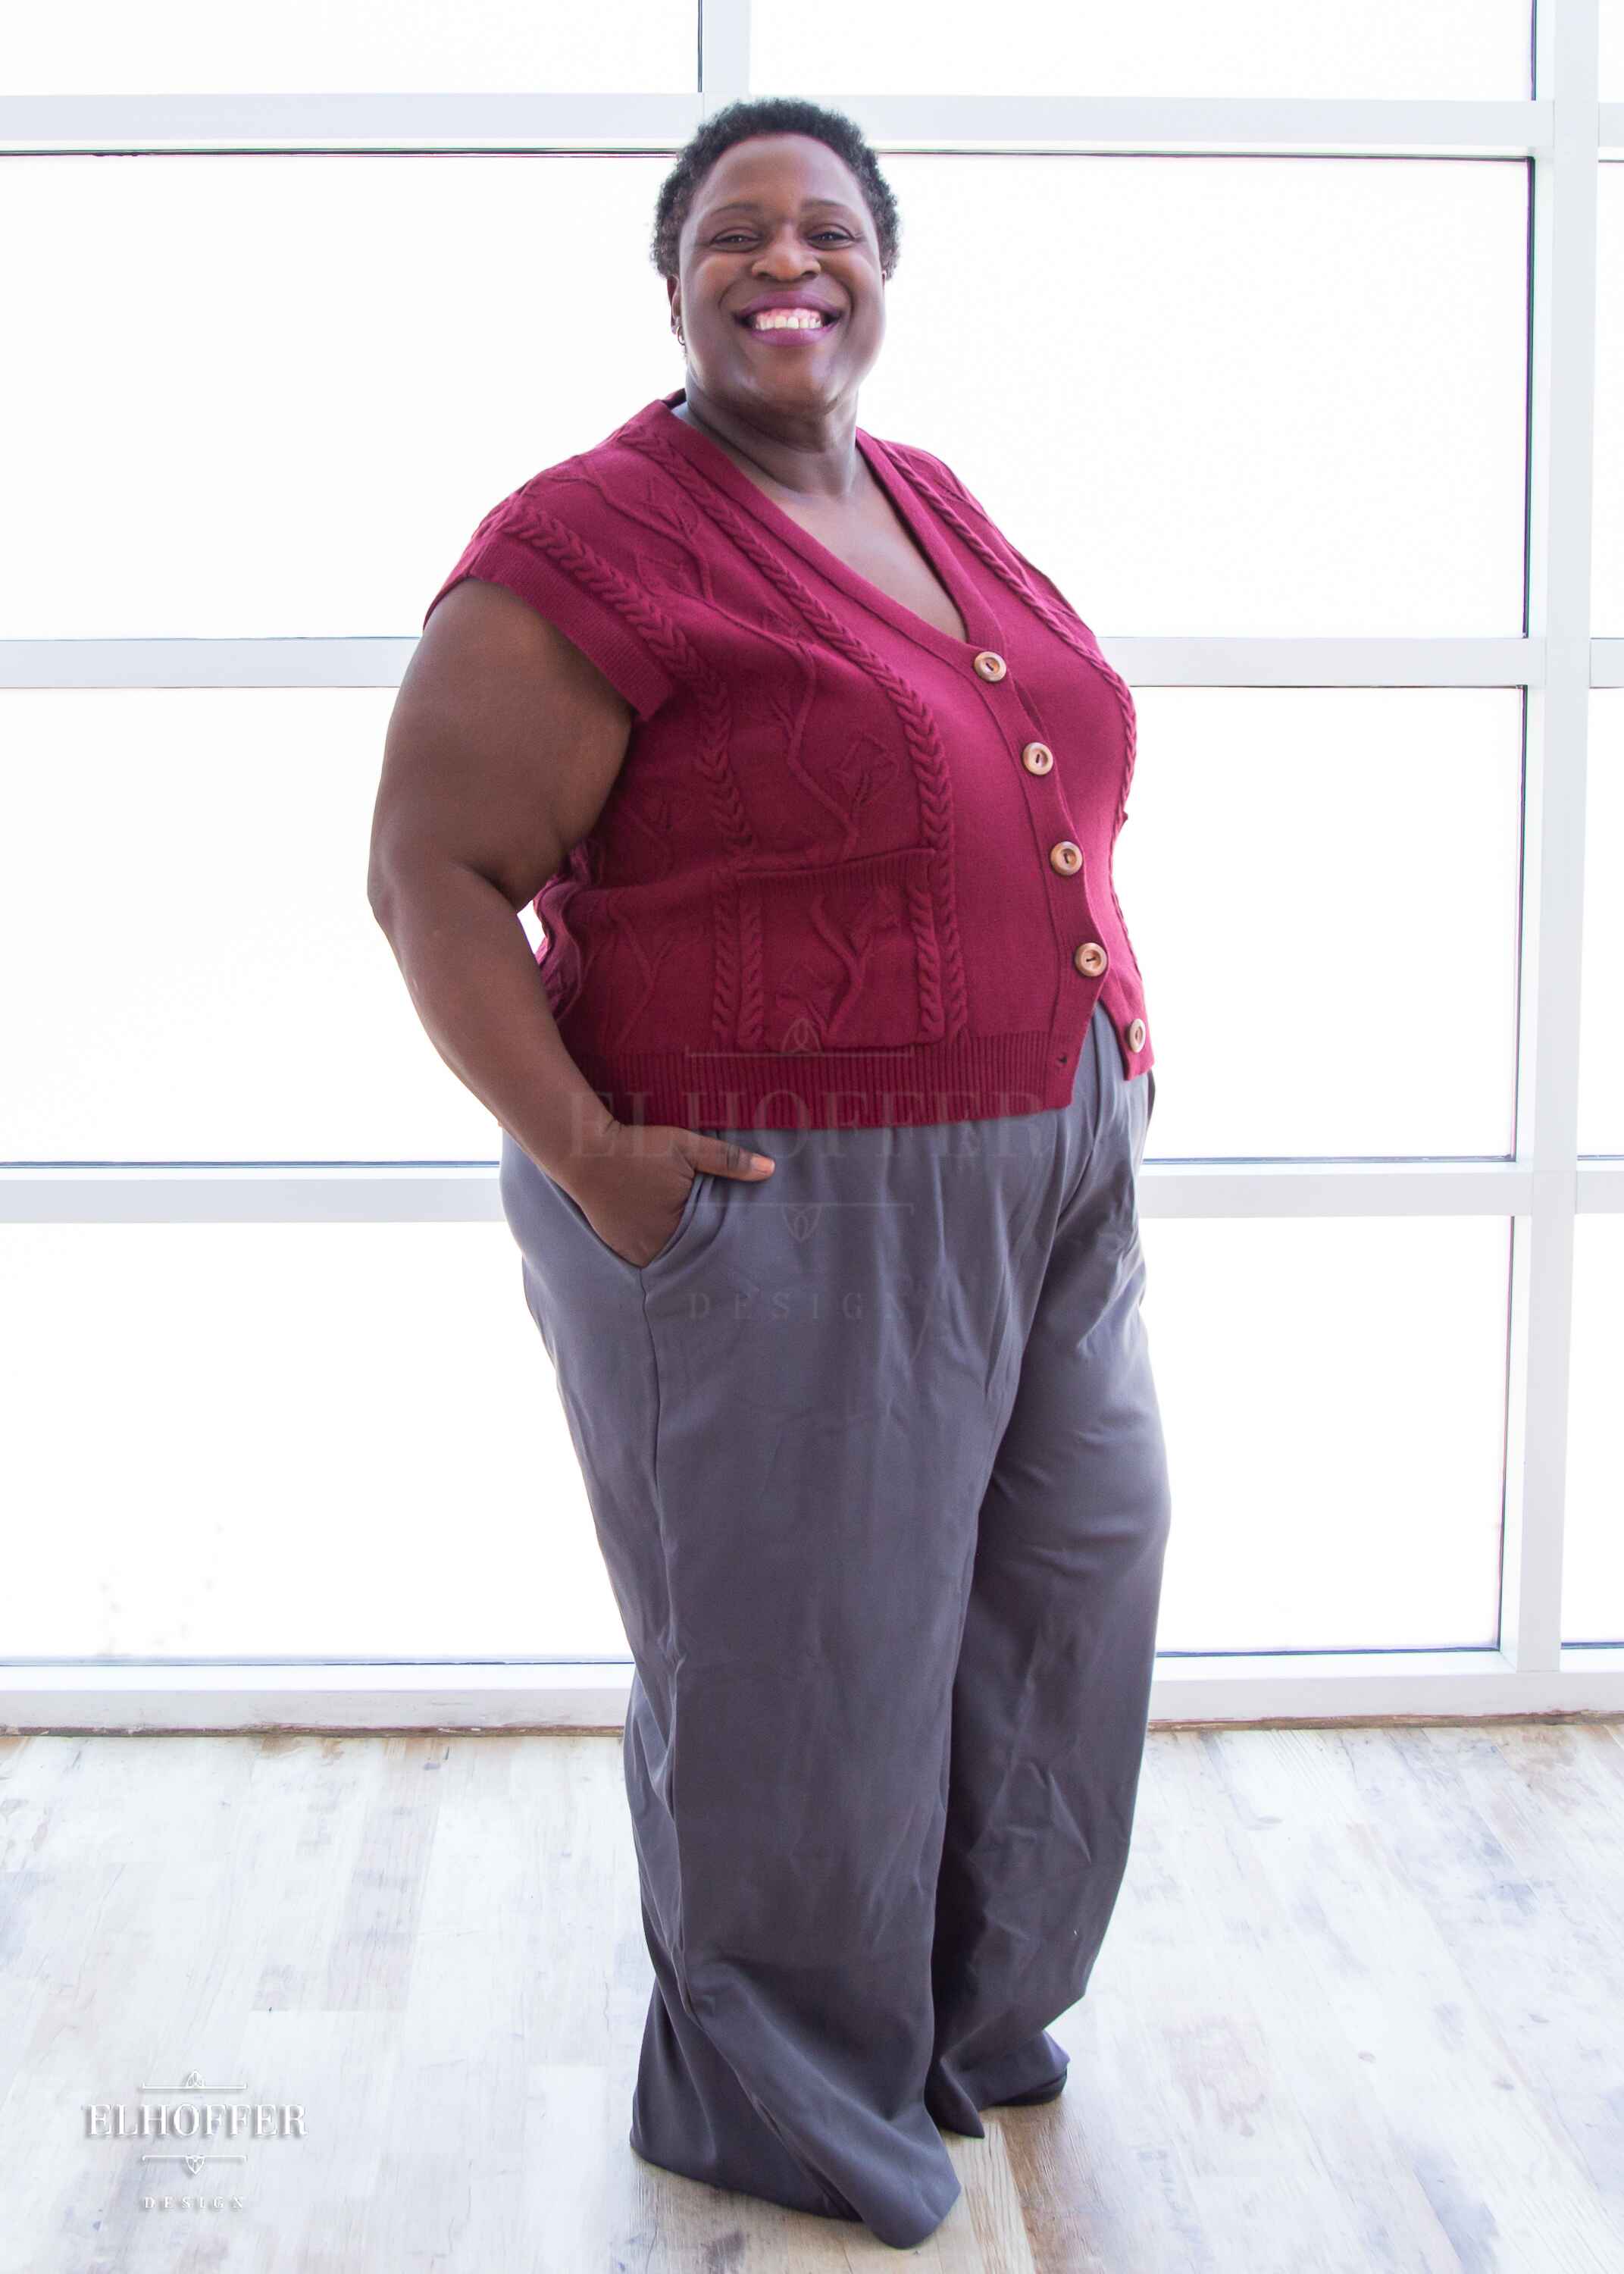 Adalgiza, a medium dark skinned 4xl model with short dark super curly hair, is smiling while wearing the L (3XL-4XL) sample of a cranberry red button up knit vest with a leafy vine and cable knit pattern, light brown buttons, and front pockets. She paired the knit vest with charcoal grey pleated trousers.